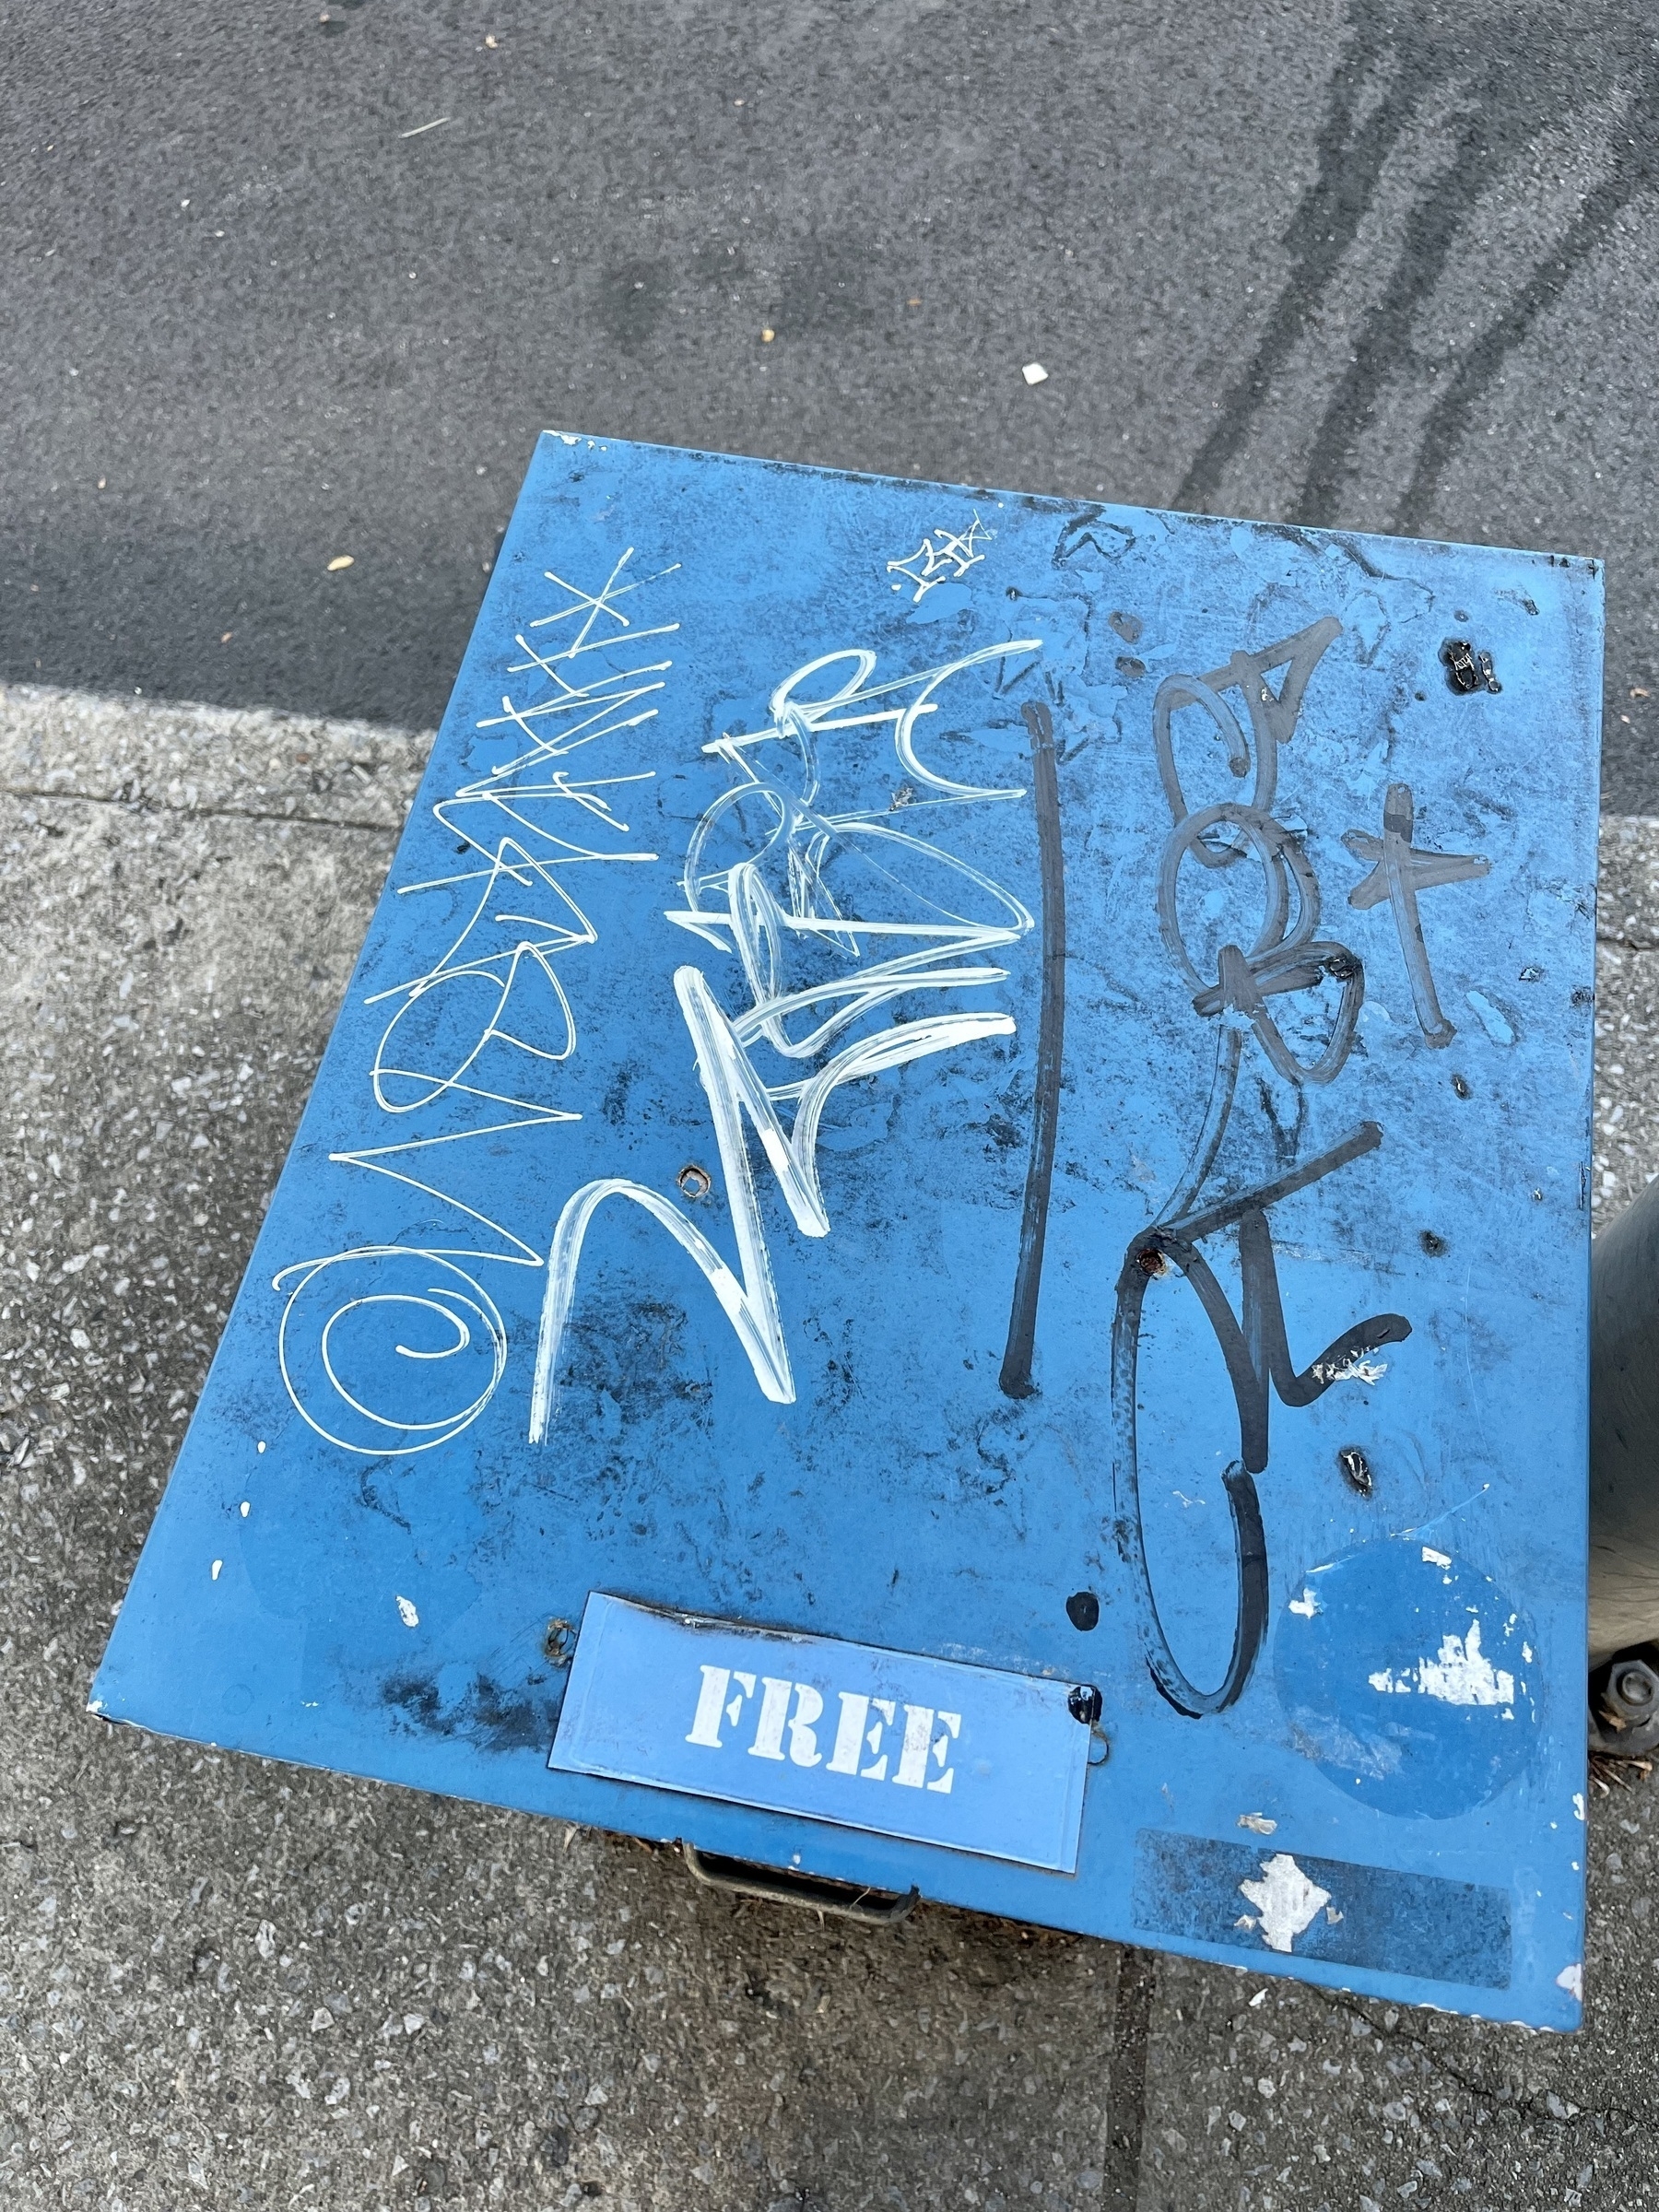 Graffiti on top of blue newspaper dispenser box. A sticker with the word “free” on the lower edge of the dispenser top. Concrete and asphalt paving below.